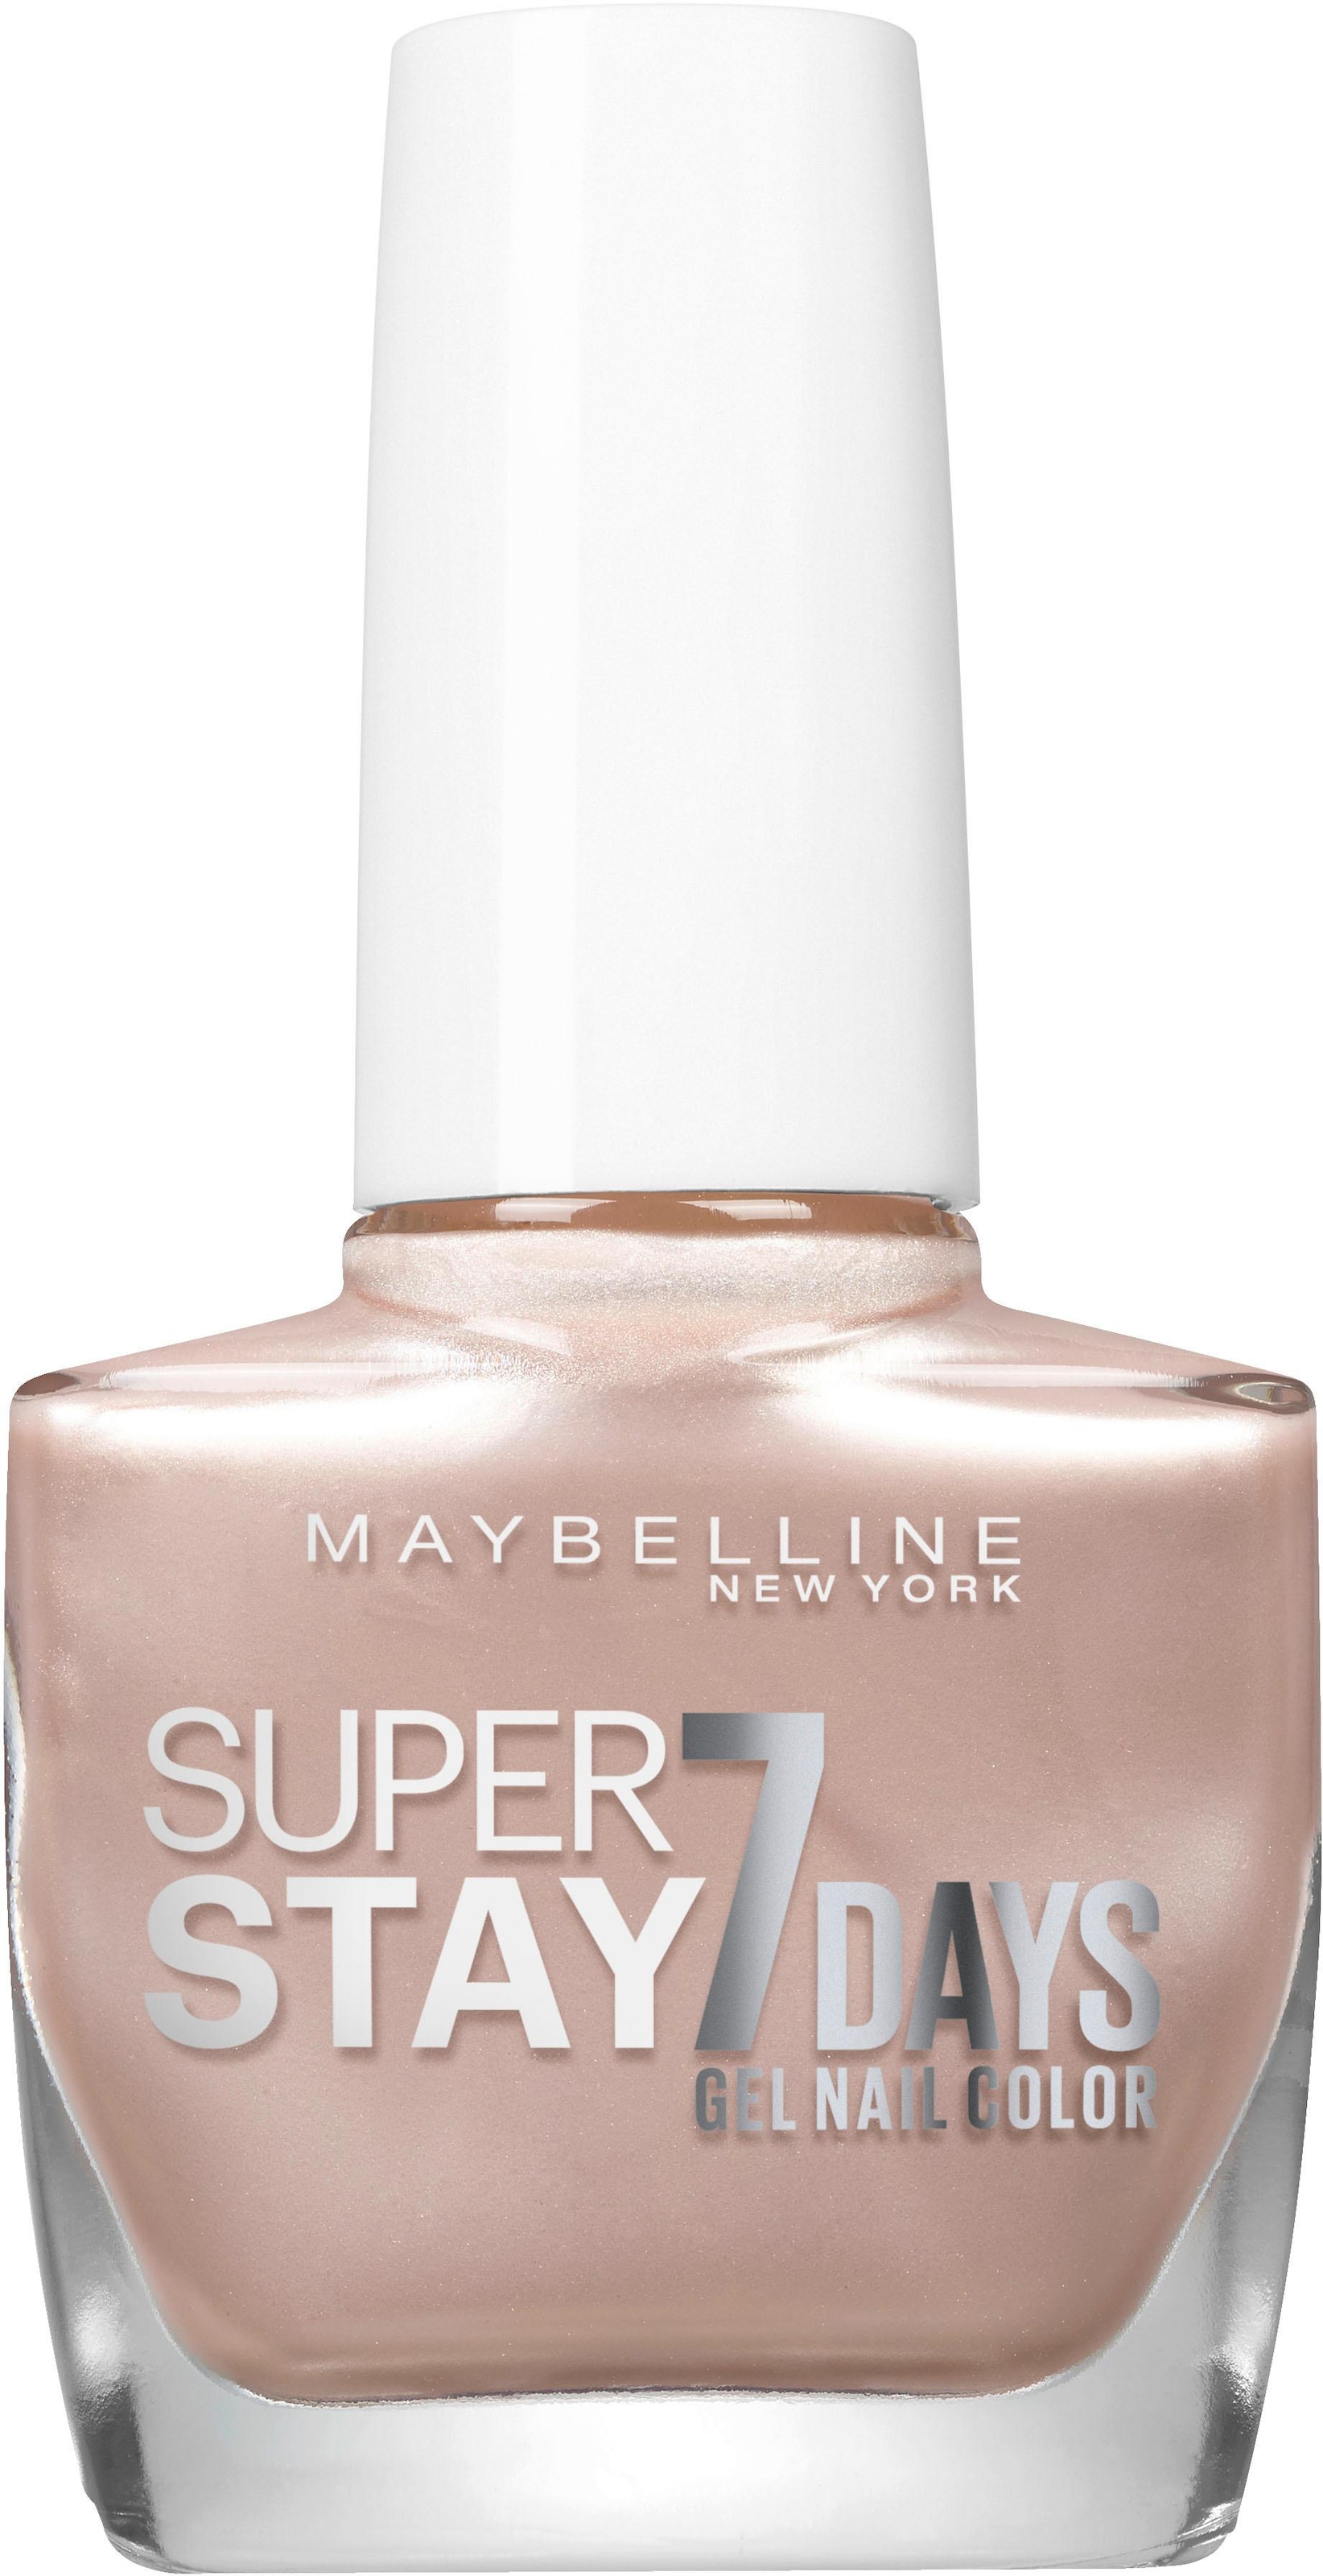 »Superstay City MAYBELLINE ♕ NEW YORK 7 Nagellack Nudes« bei Tage